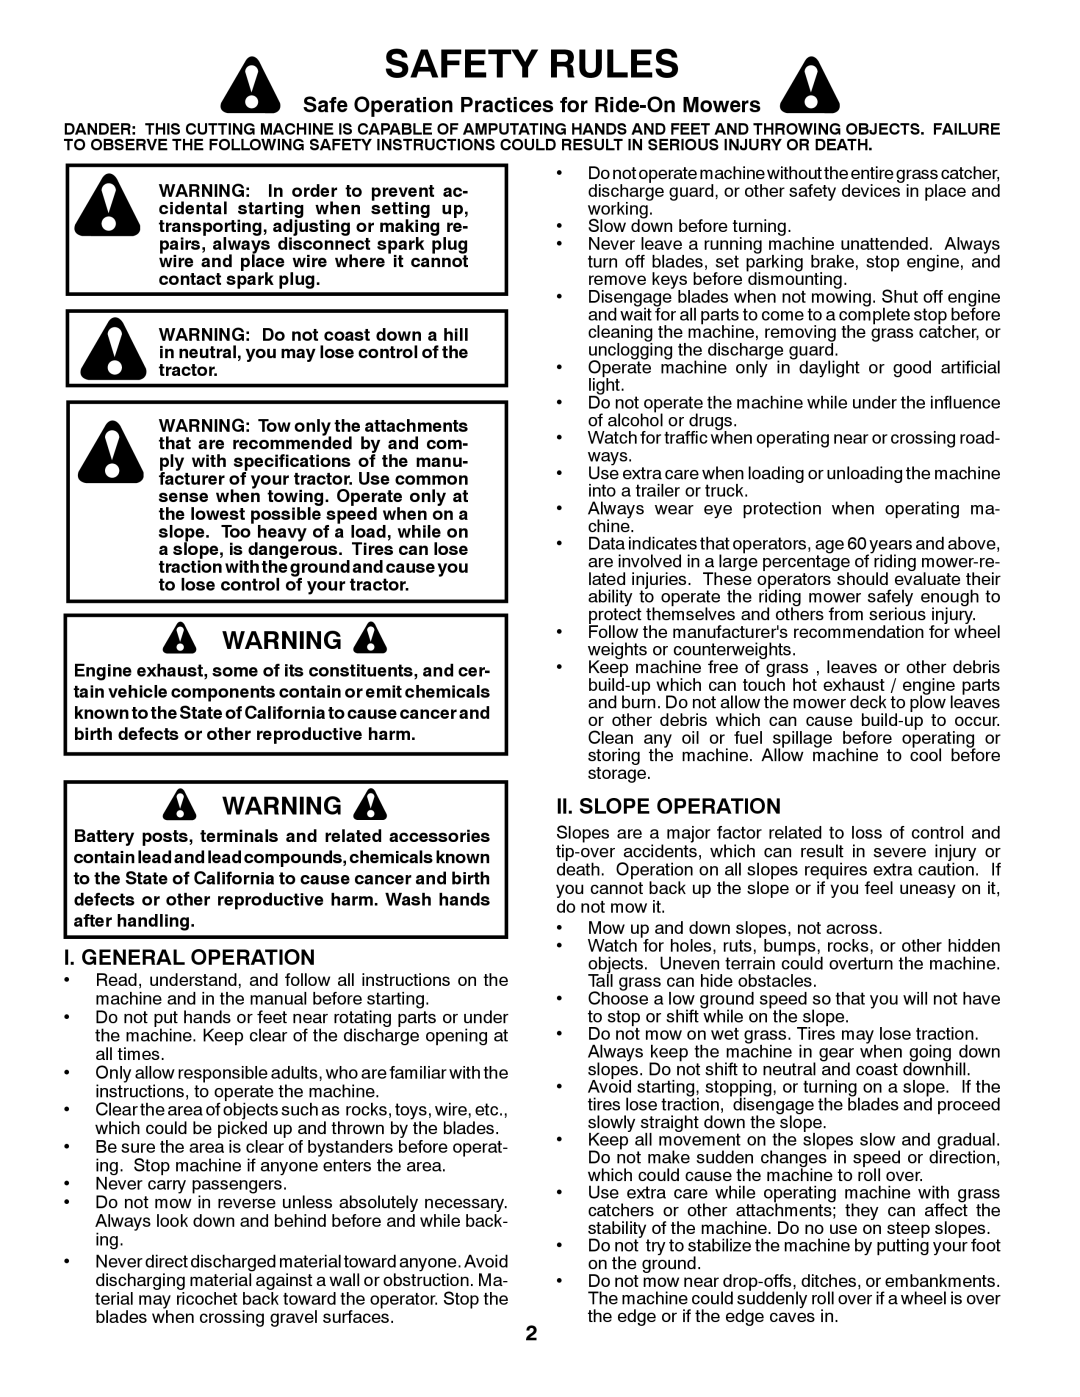 Husqvarna YTH2146XP Safety Rules, Safe Operation Practices for Ride-On Mowers, I. General Operation, Ii. Slope Operation 